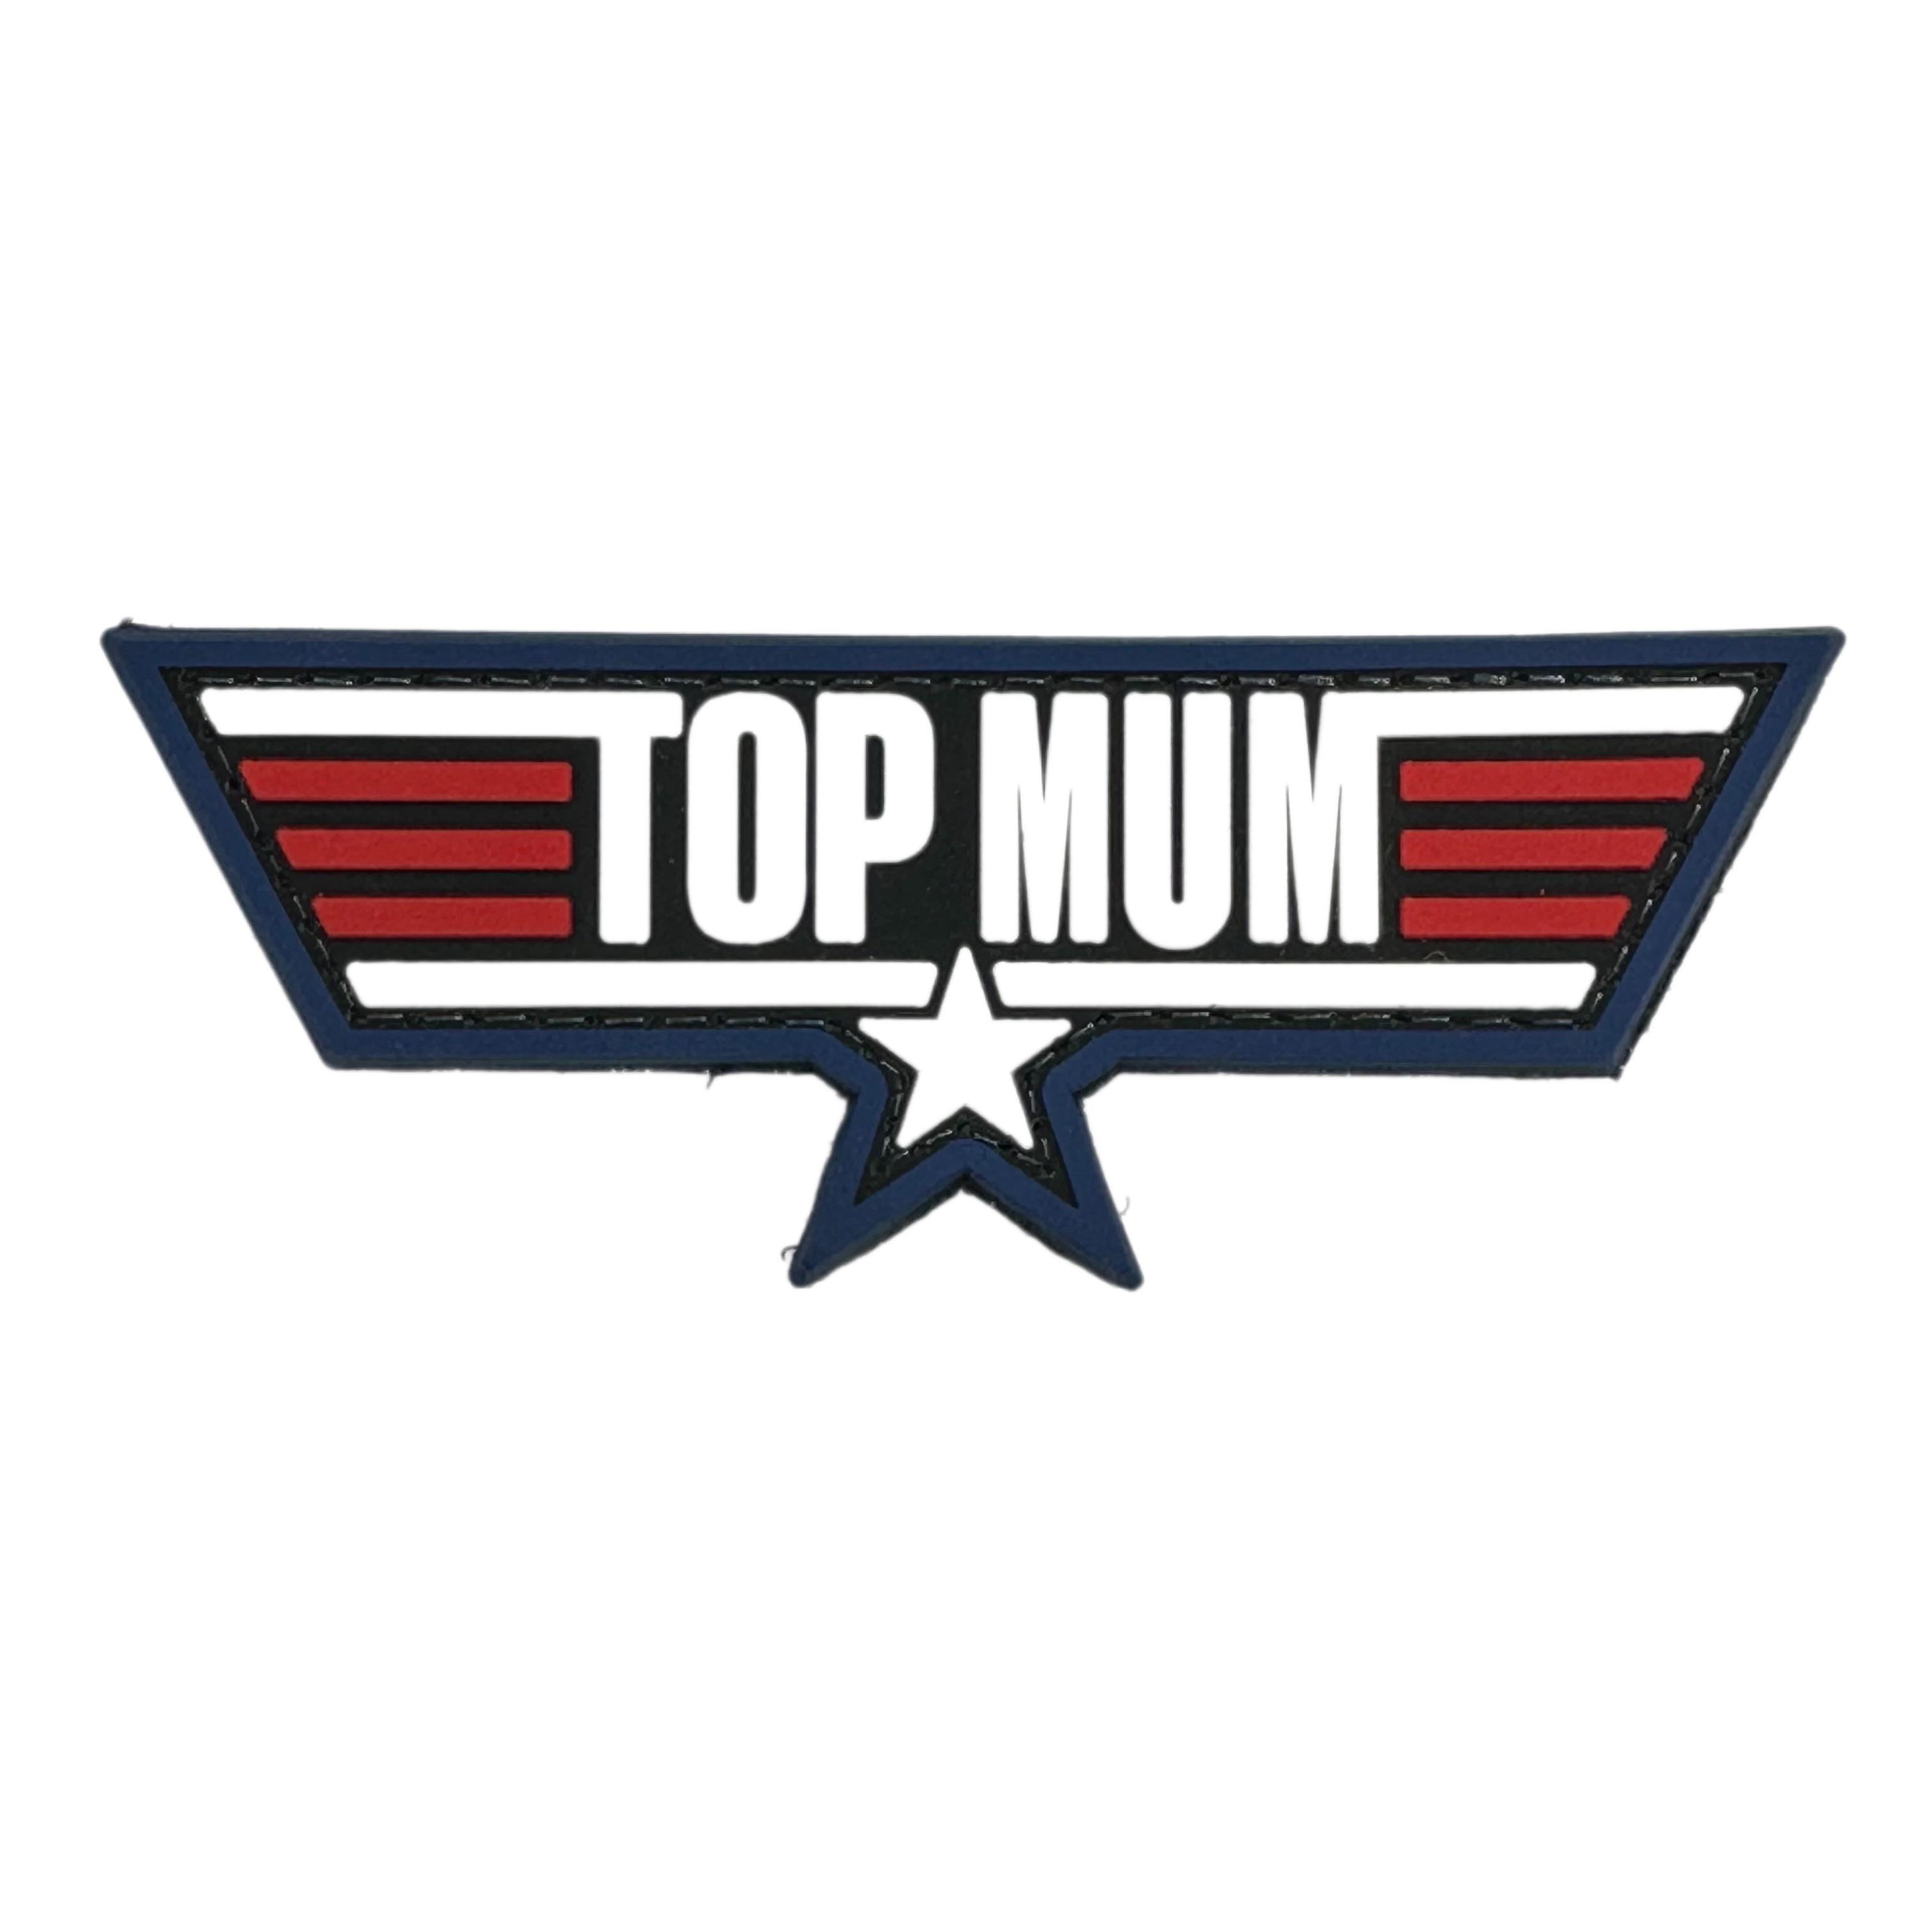 Rubber Patch - Top MUM